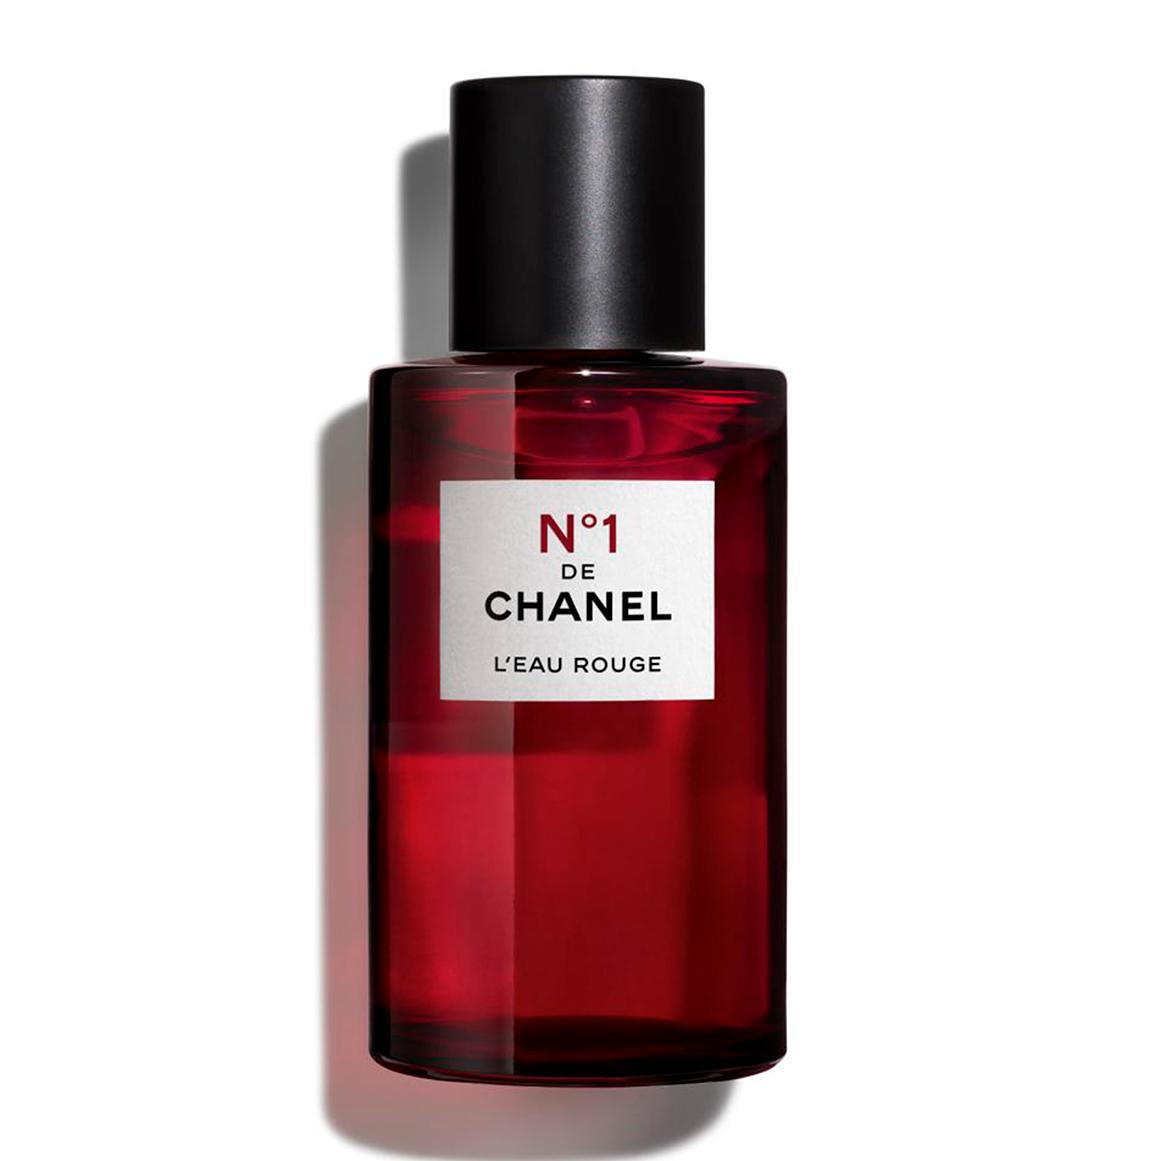 Chanel No. 5 Is on Sale at 's Black Friday Sale: Get 25% Off the  Iconic Perfume for Holiday Gifting